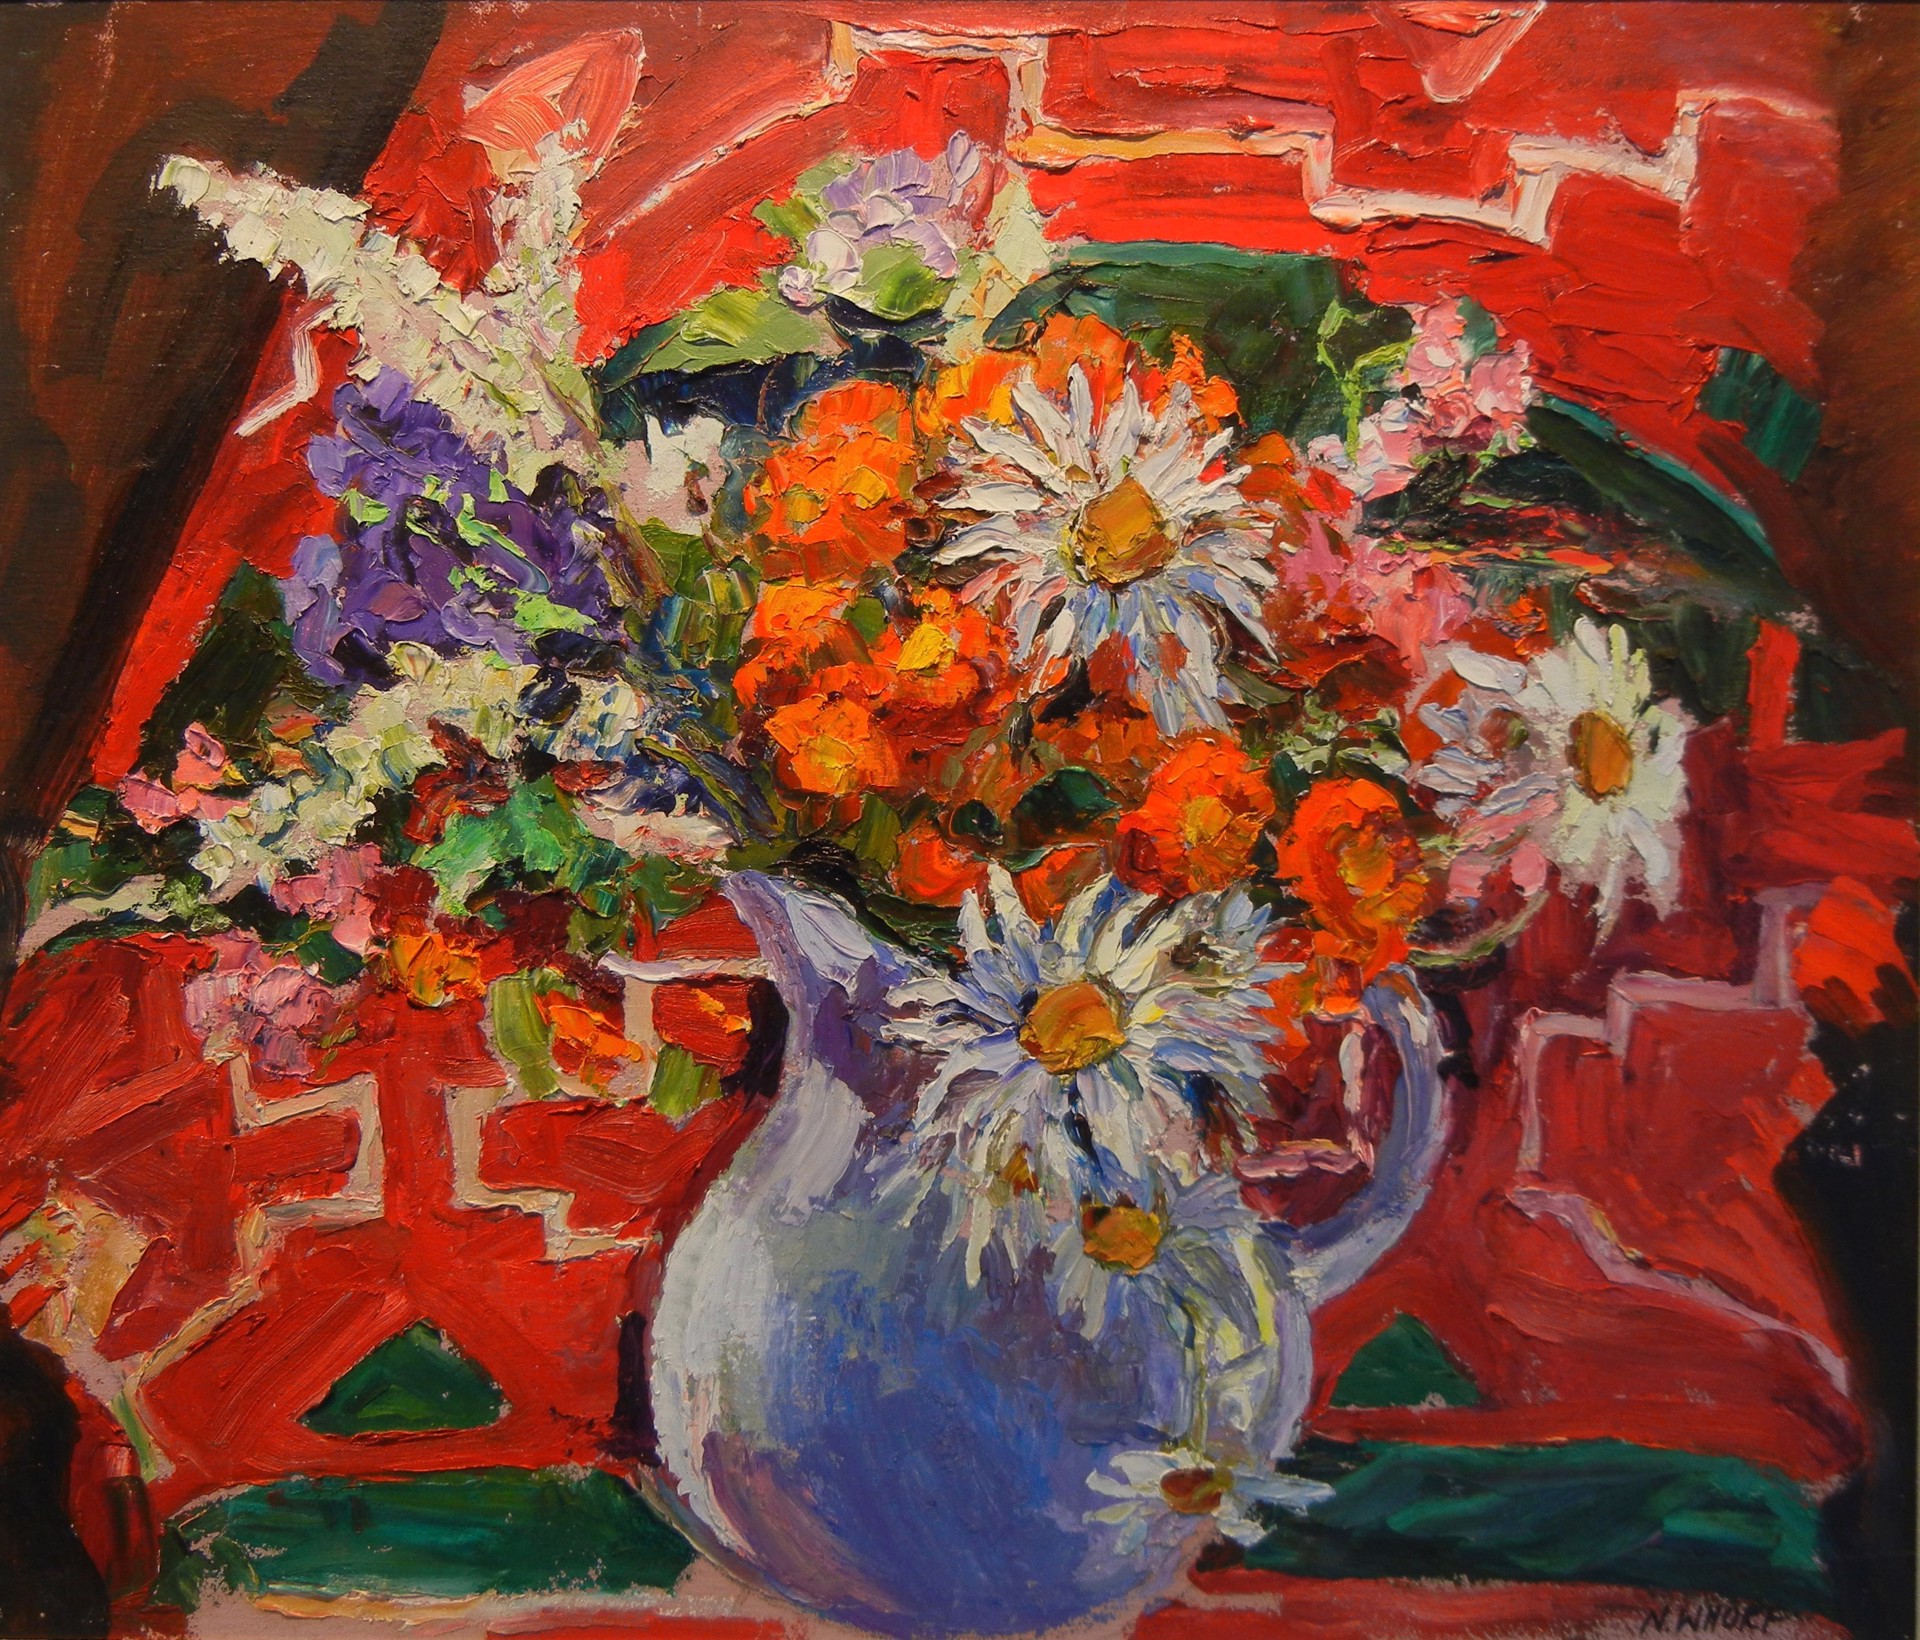 Flowers on Red by Nancy Whorf